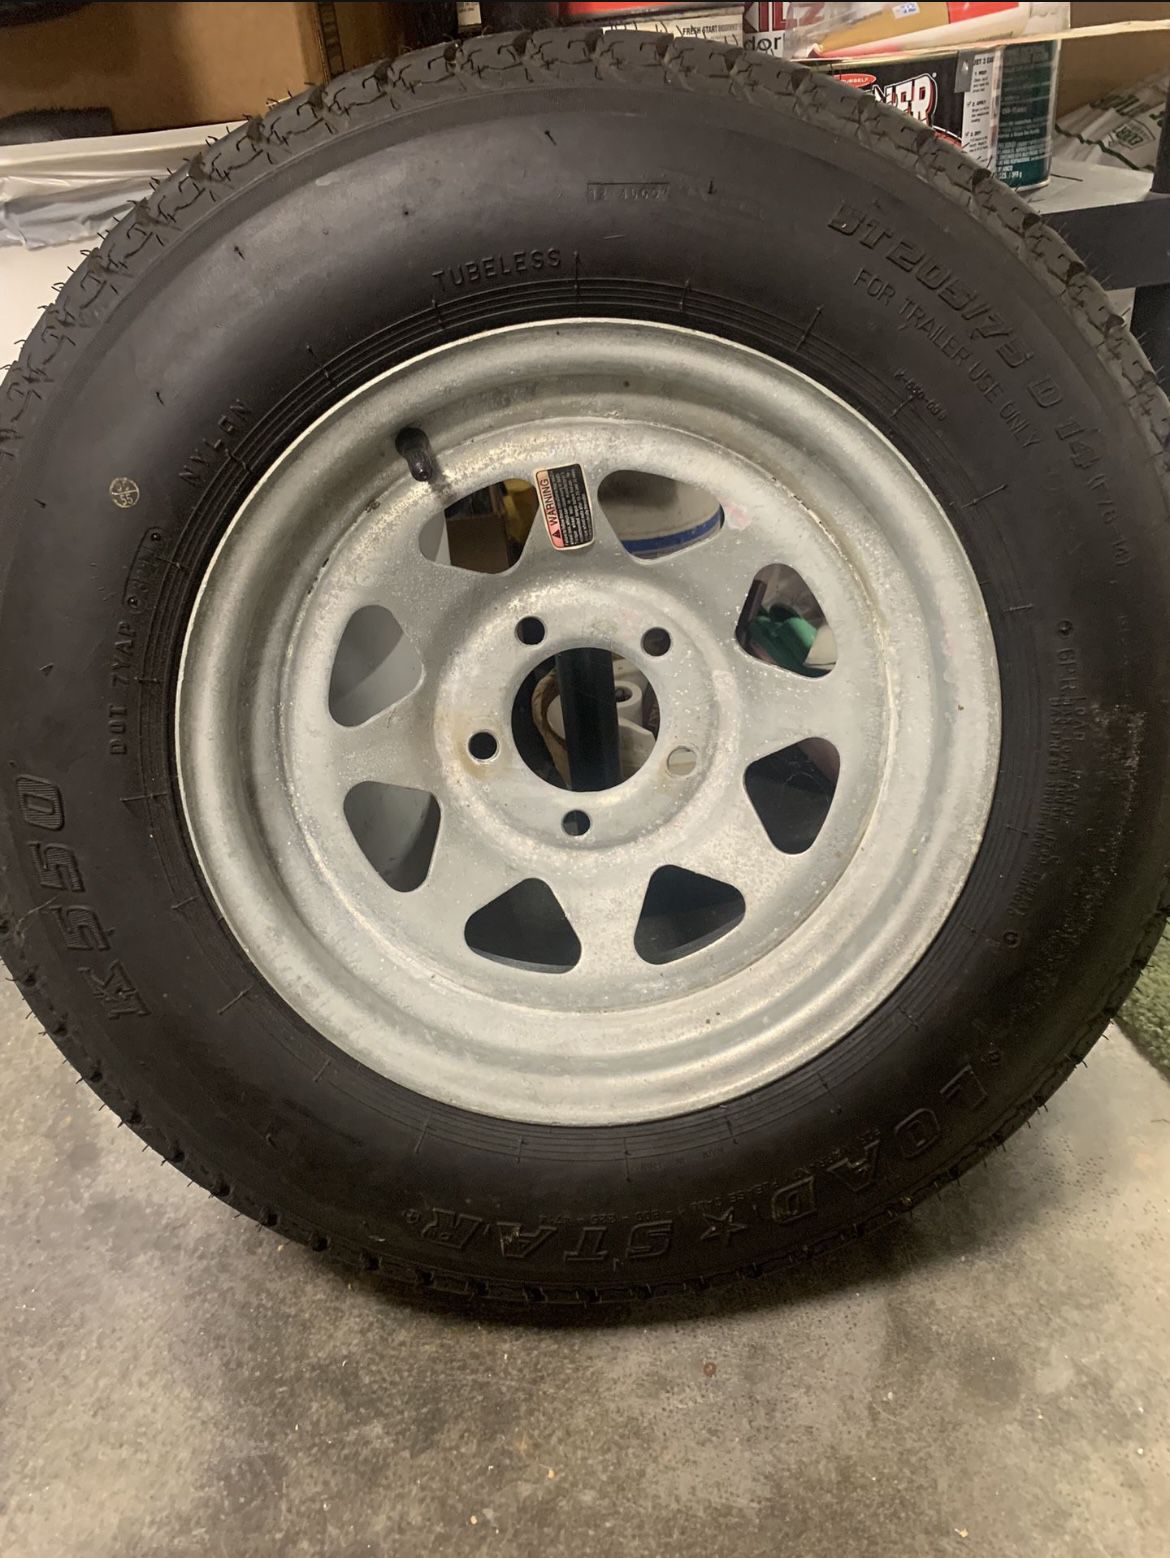 New Trailer Tire Mounted On Wheel